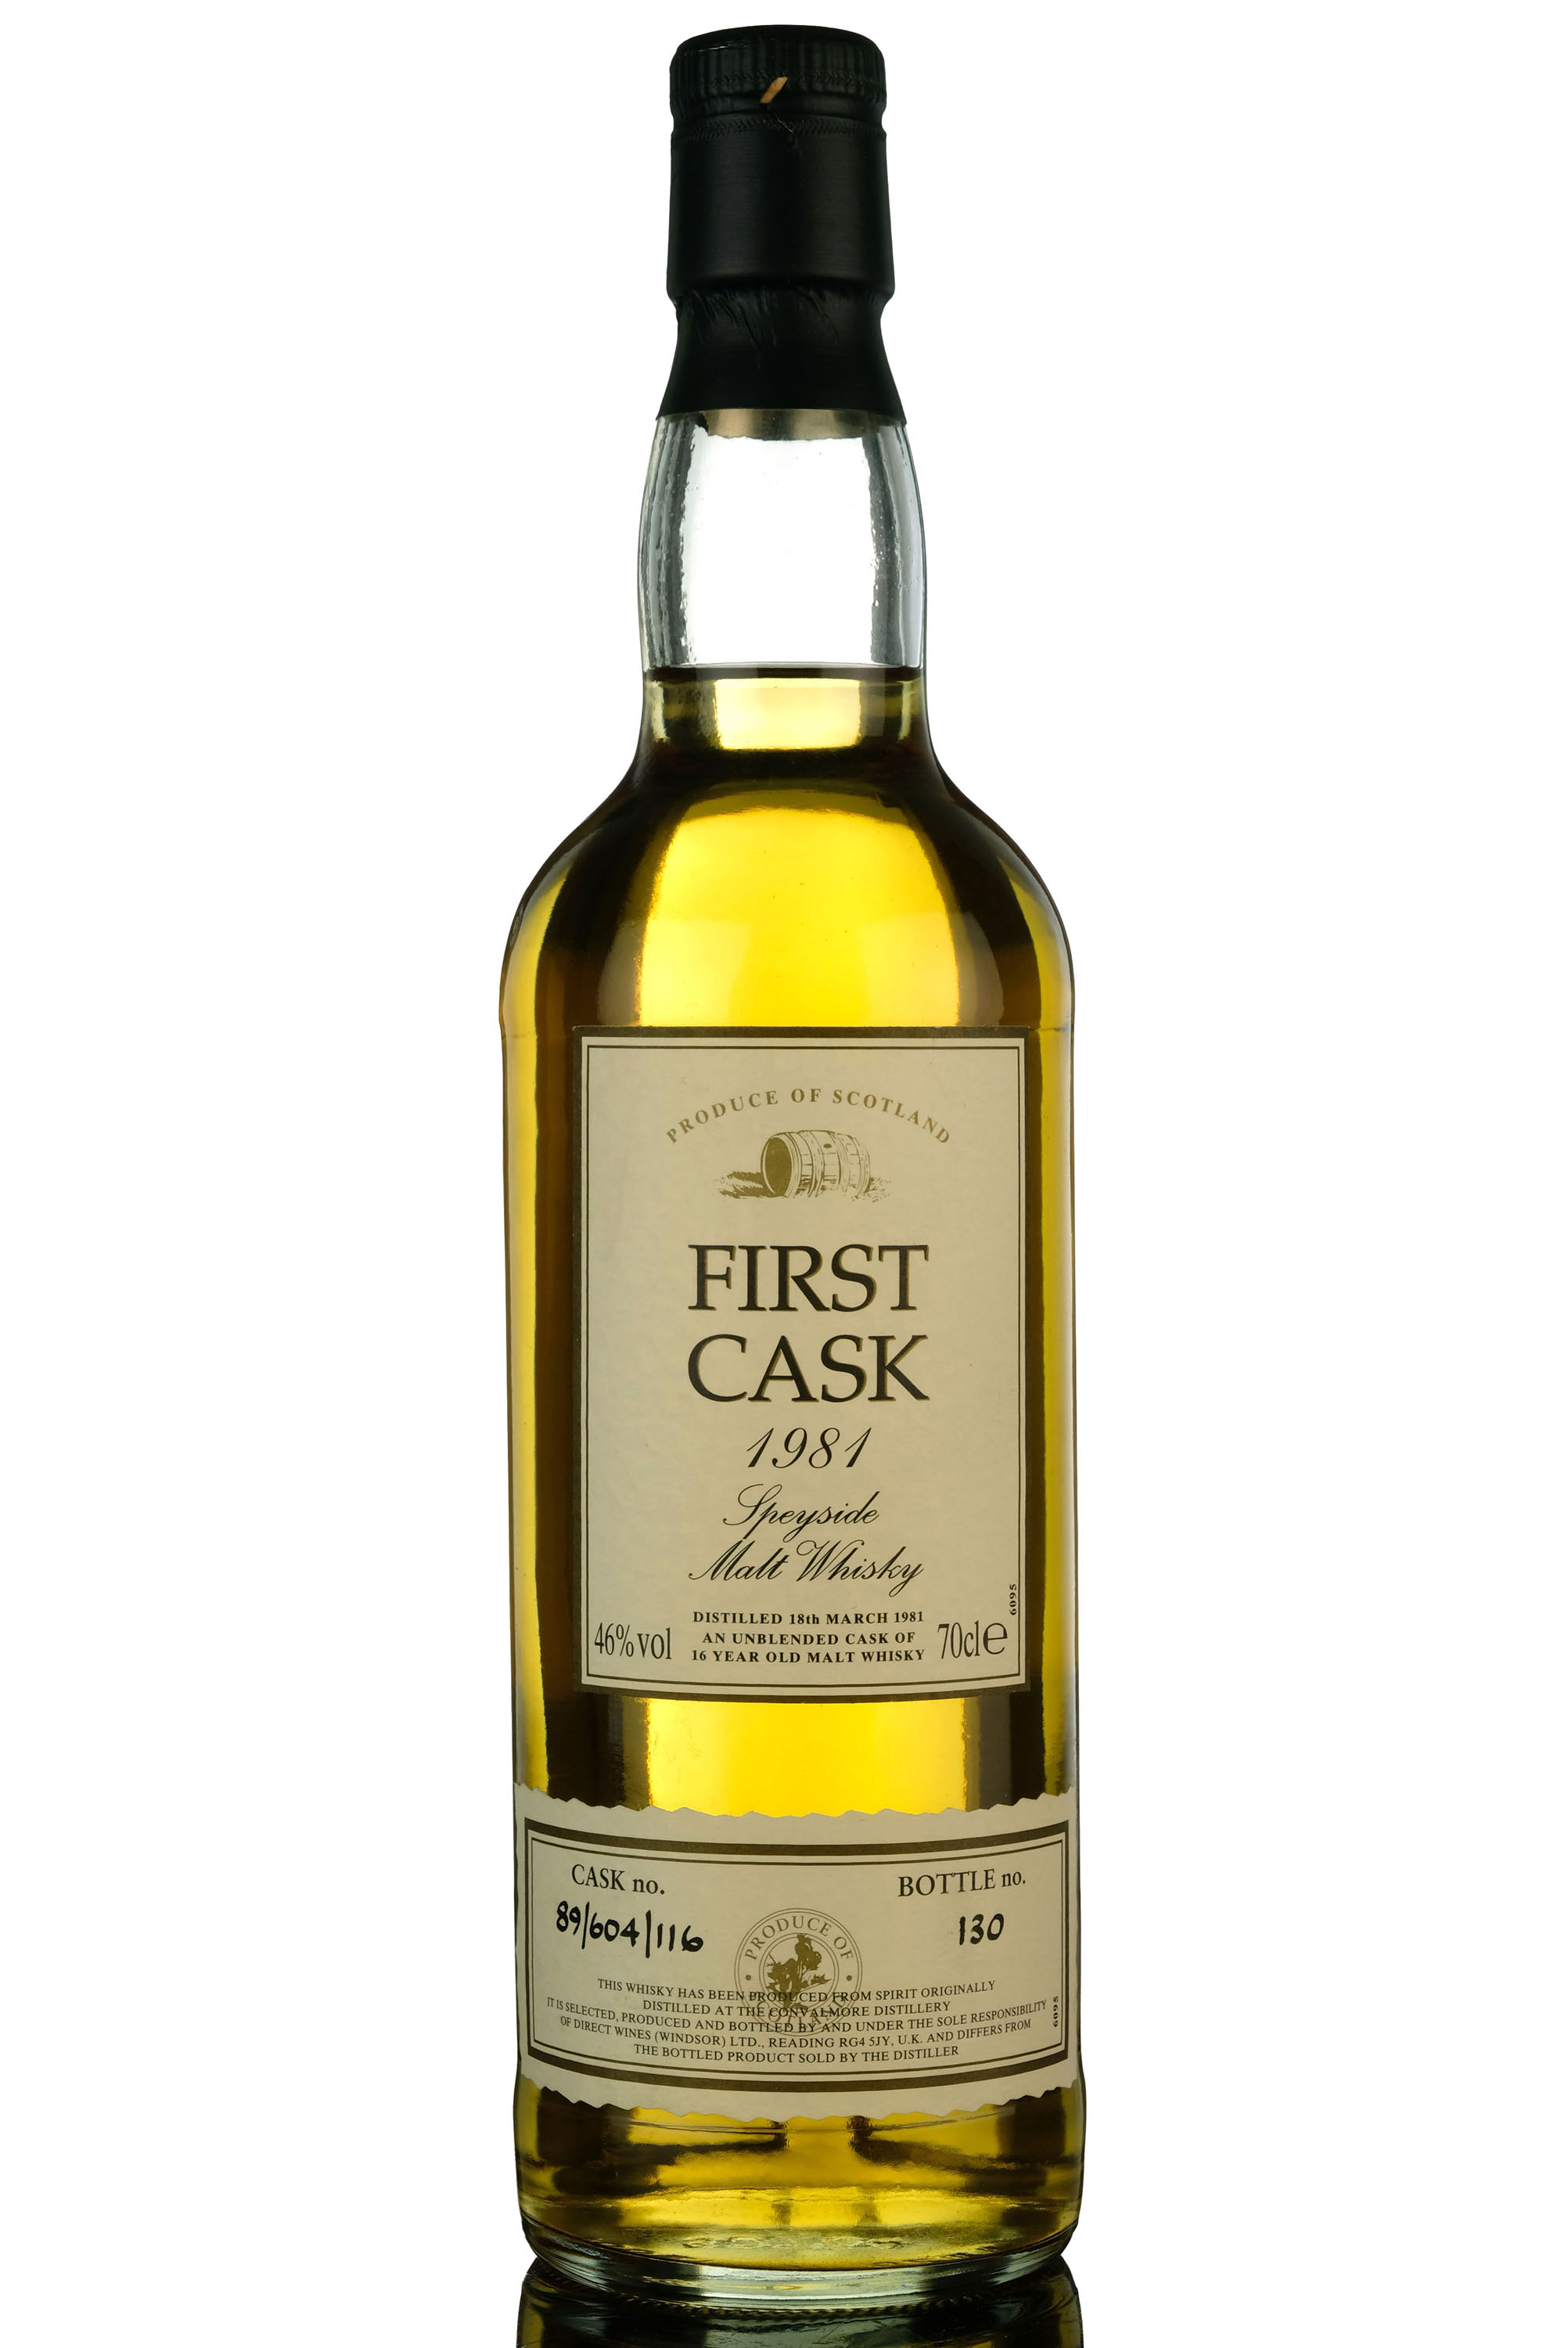 Convalmore 1981 - 16 Year Old - First Cask - Single Cask 89/604/116